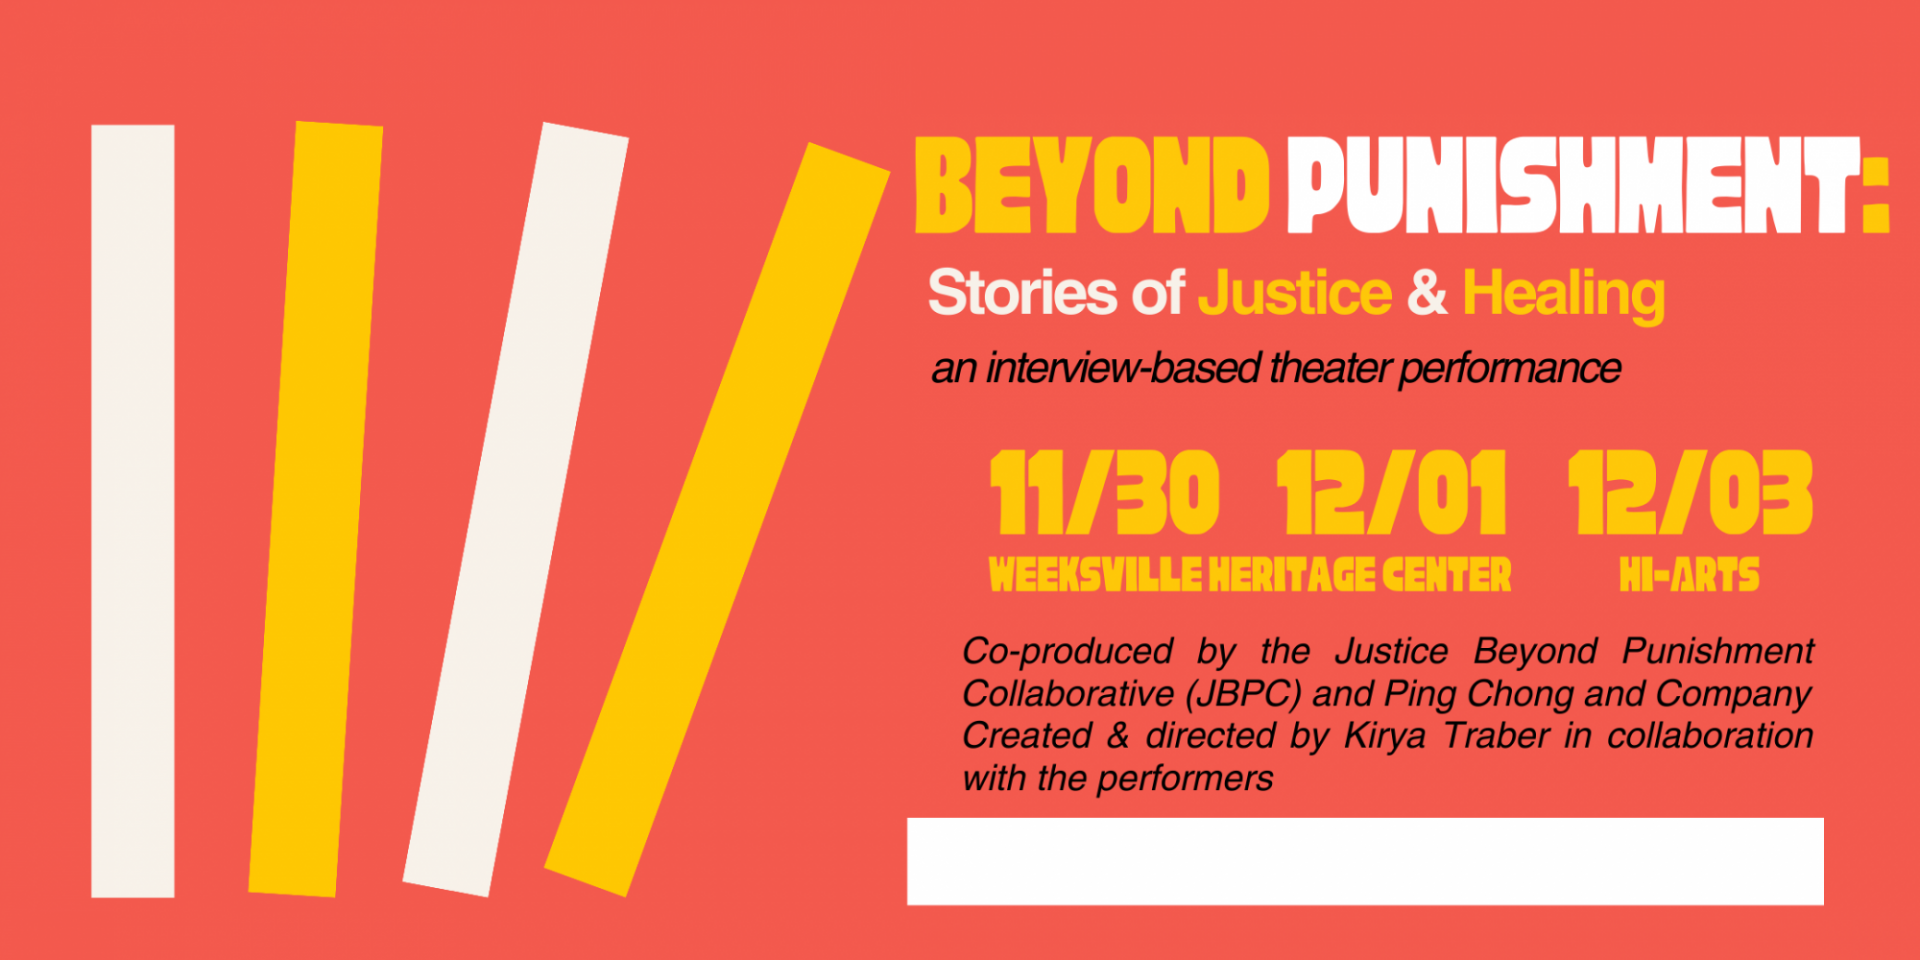 Beyond Punishment: Stories of Justice and Healing, an interview-based theater performance